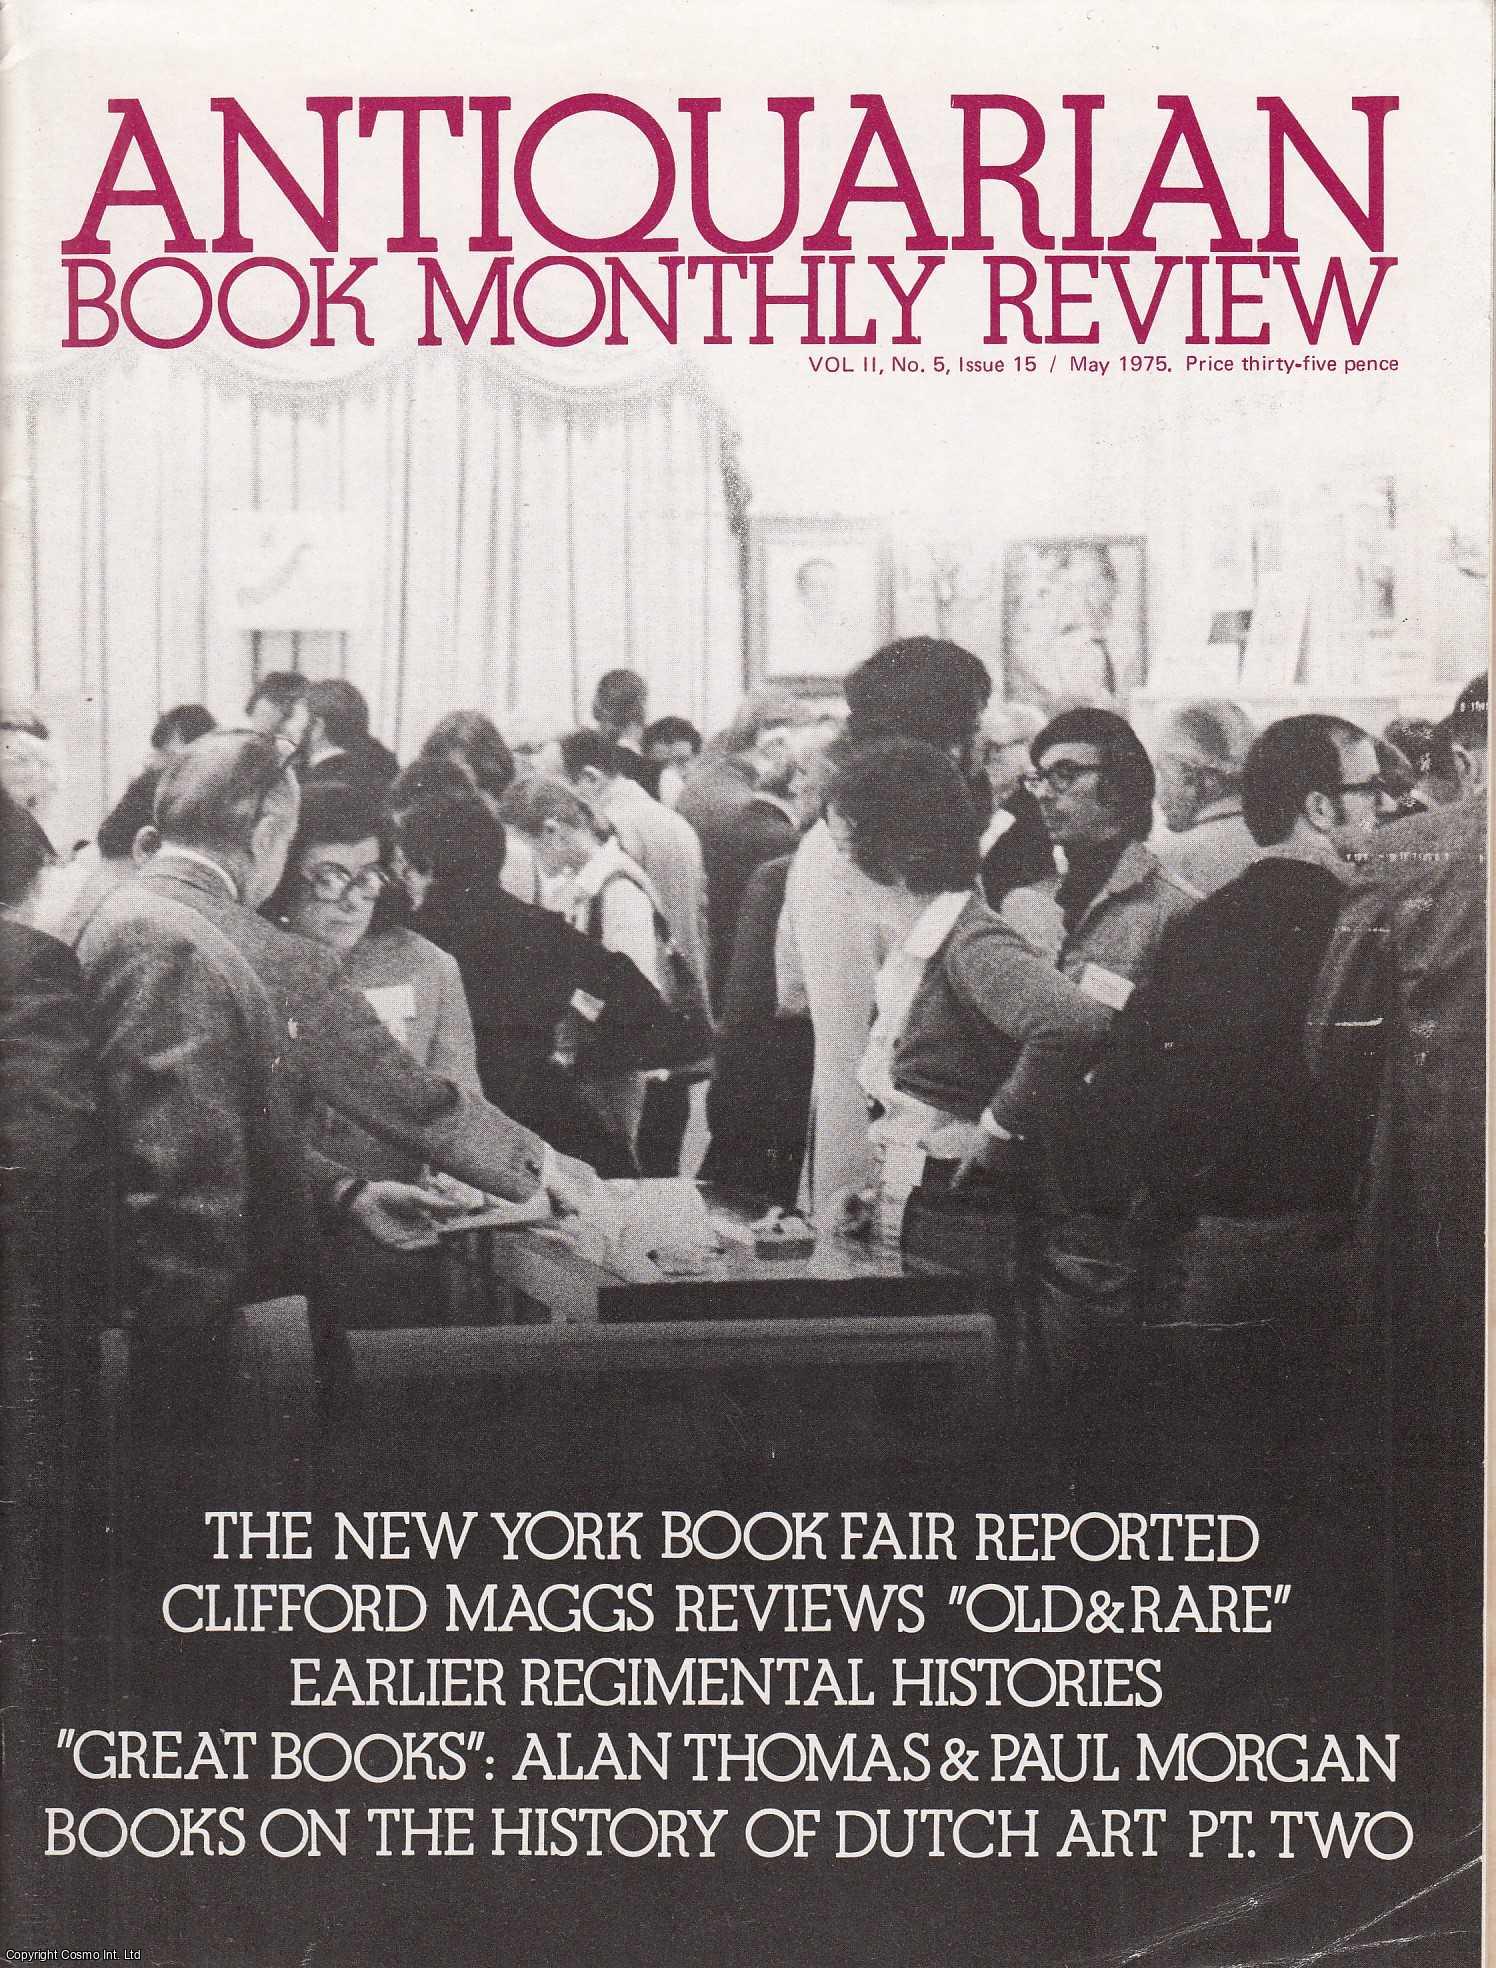 Walter A. Liedtke - The History of Dutch Art, antiquarian and out of print books, Part 2 (of 2). An original article contained in a complete monthly issue of the Antiquarian Book Monthly Review (ABMR), 1975.